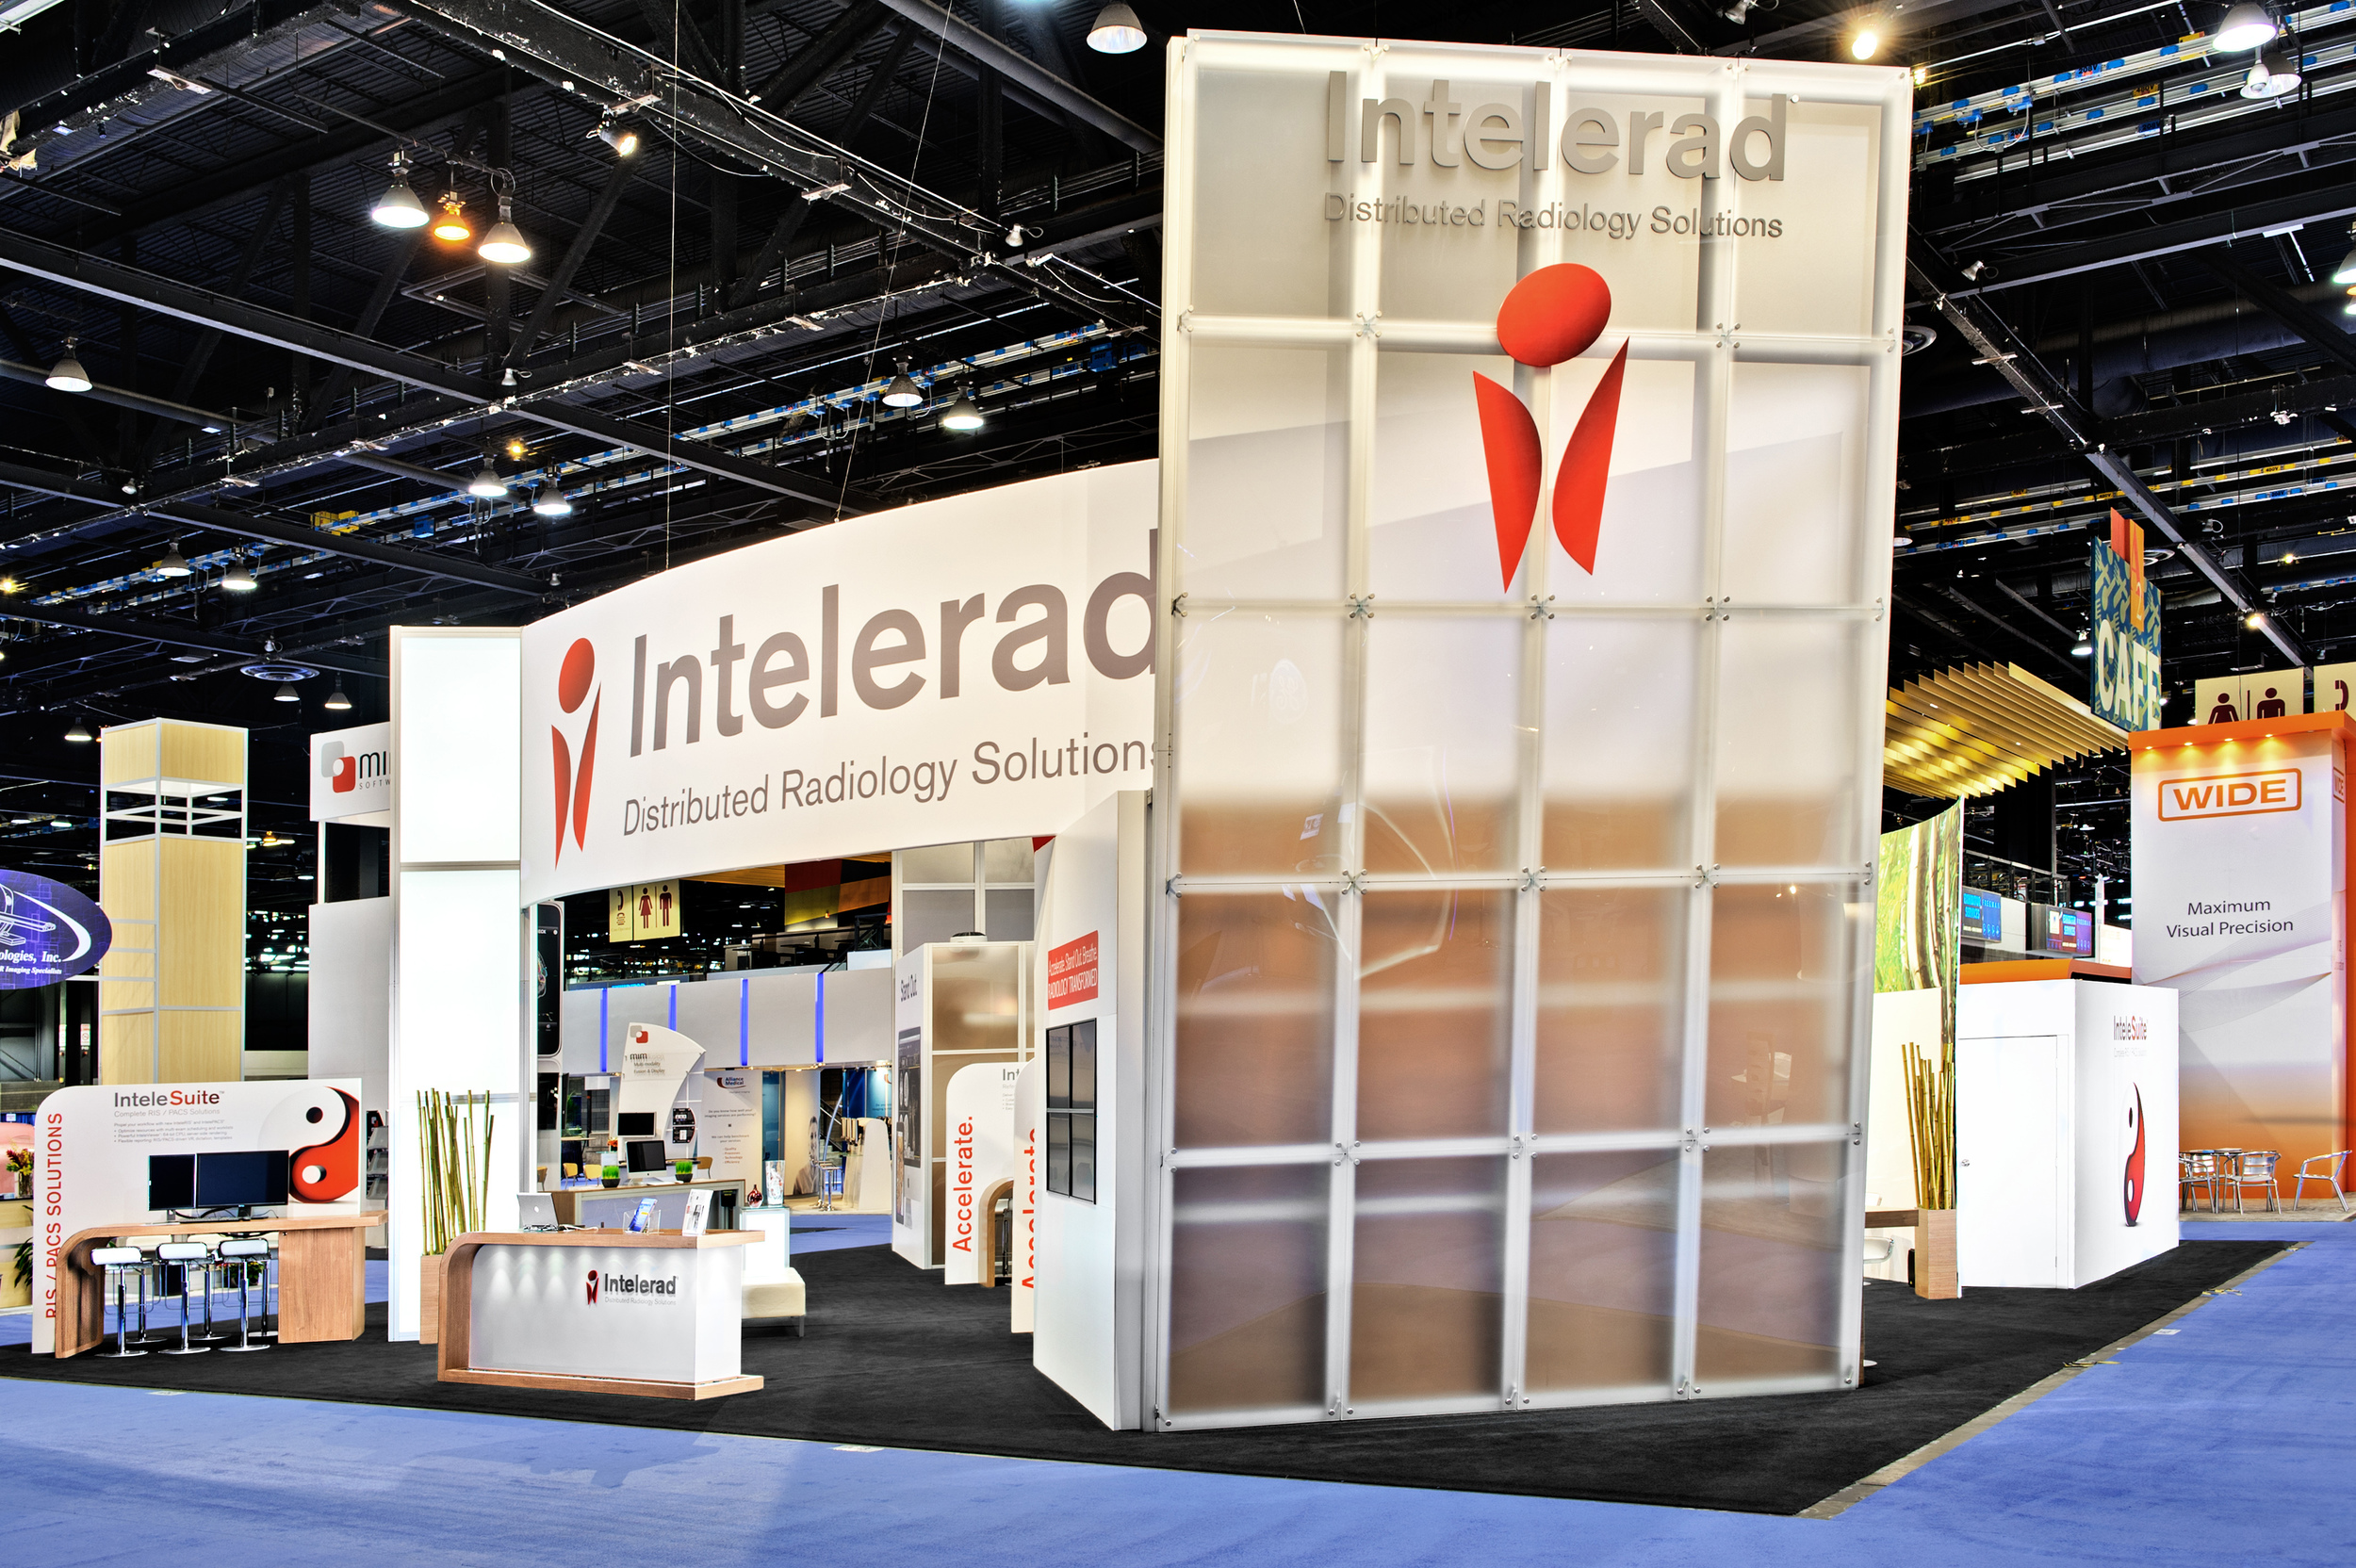 Intelerad's trade show booth rental with a photo of the custom acrylic slanted wall